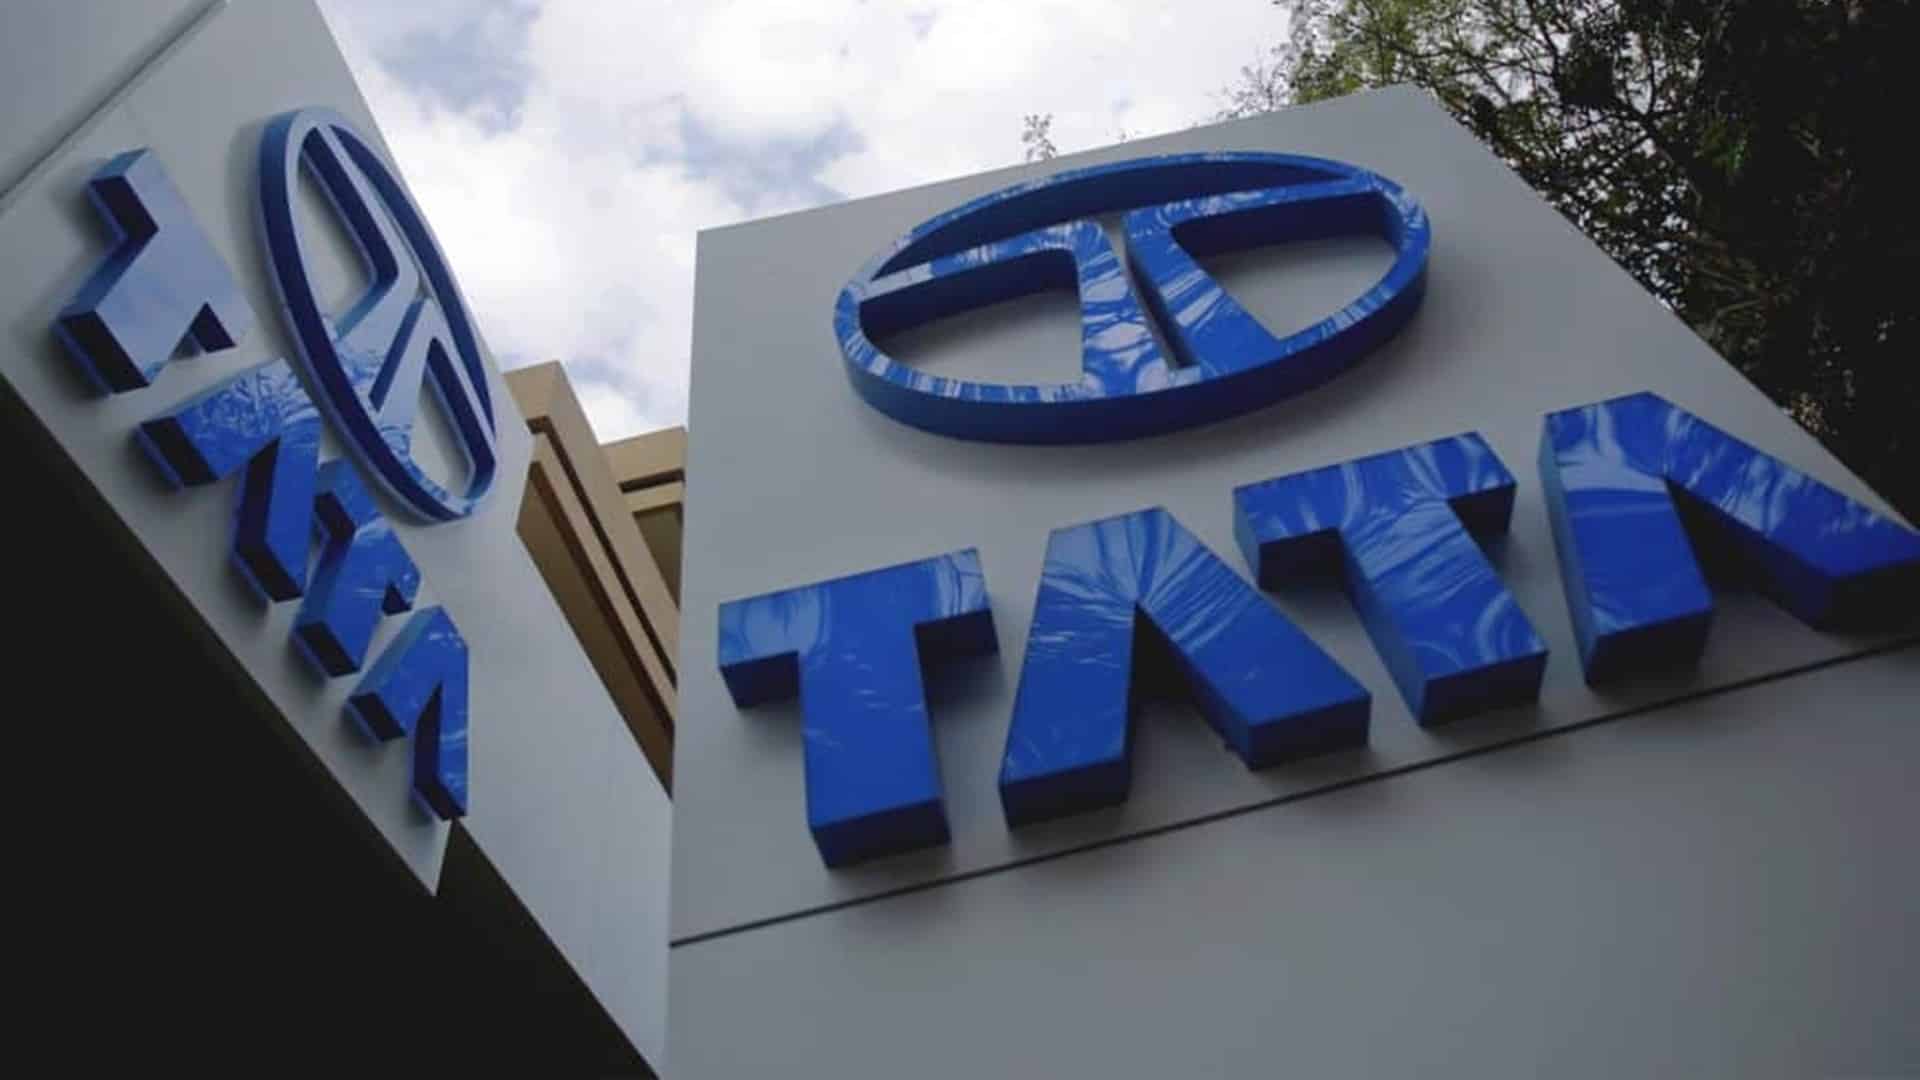 Tata Motors signs MoU with Gujarat govt to take over Ford’s Sanand plant